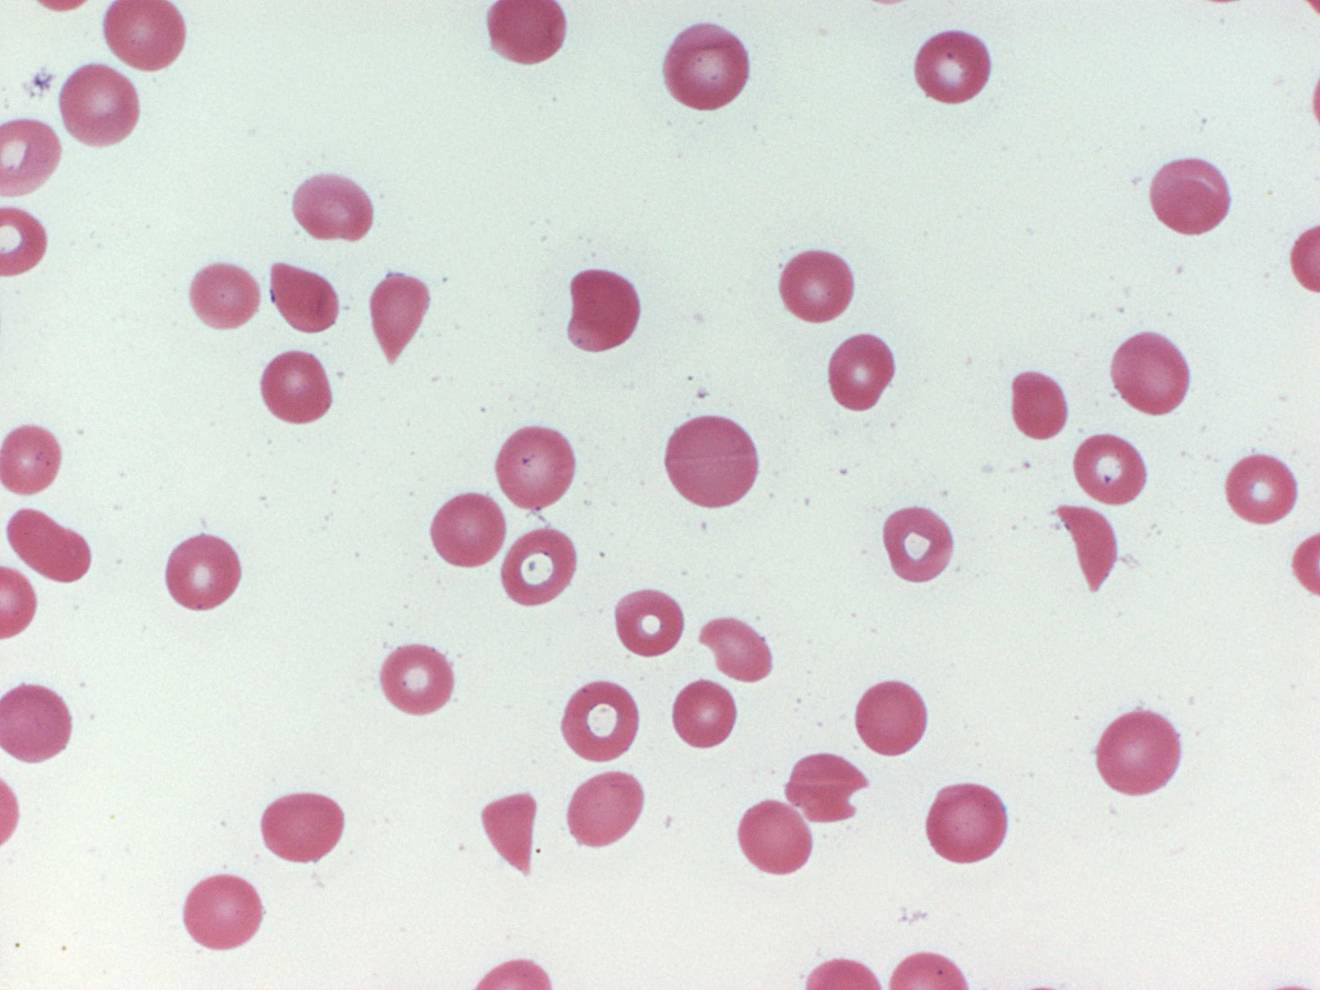 microscopic view of blood cells from a patient with TTP